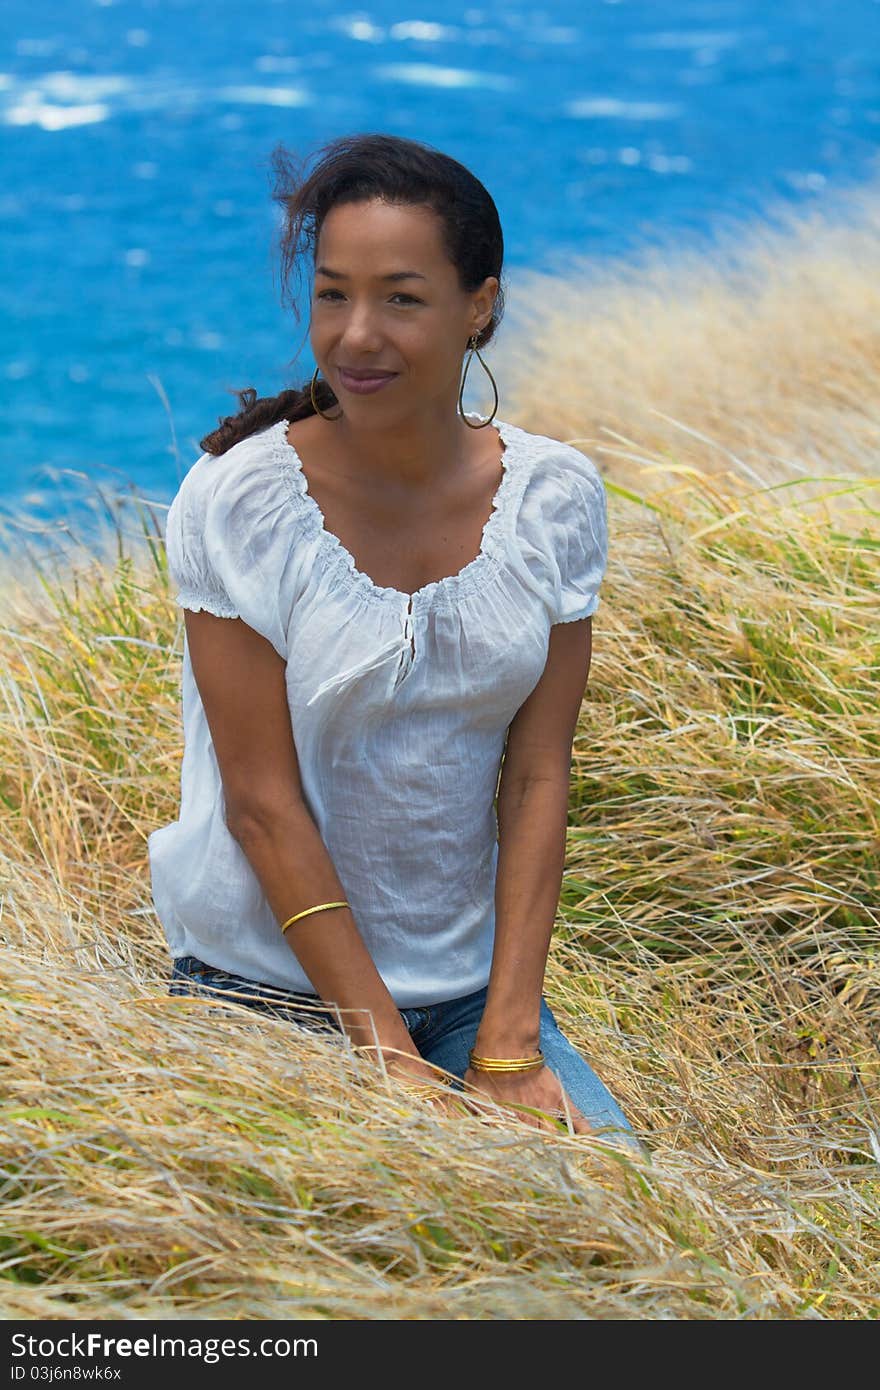 An exotic Hawaiian woman sits in the tall grass on a cliffside overlooking the ocean in Maui, Hawaii. Vertical image orientation. An exotic Hawaiian woman sits in the tall grass on a cliffside overlooking the ocean in Maui, Hawaii. Vertical image orientation.